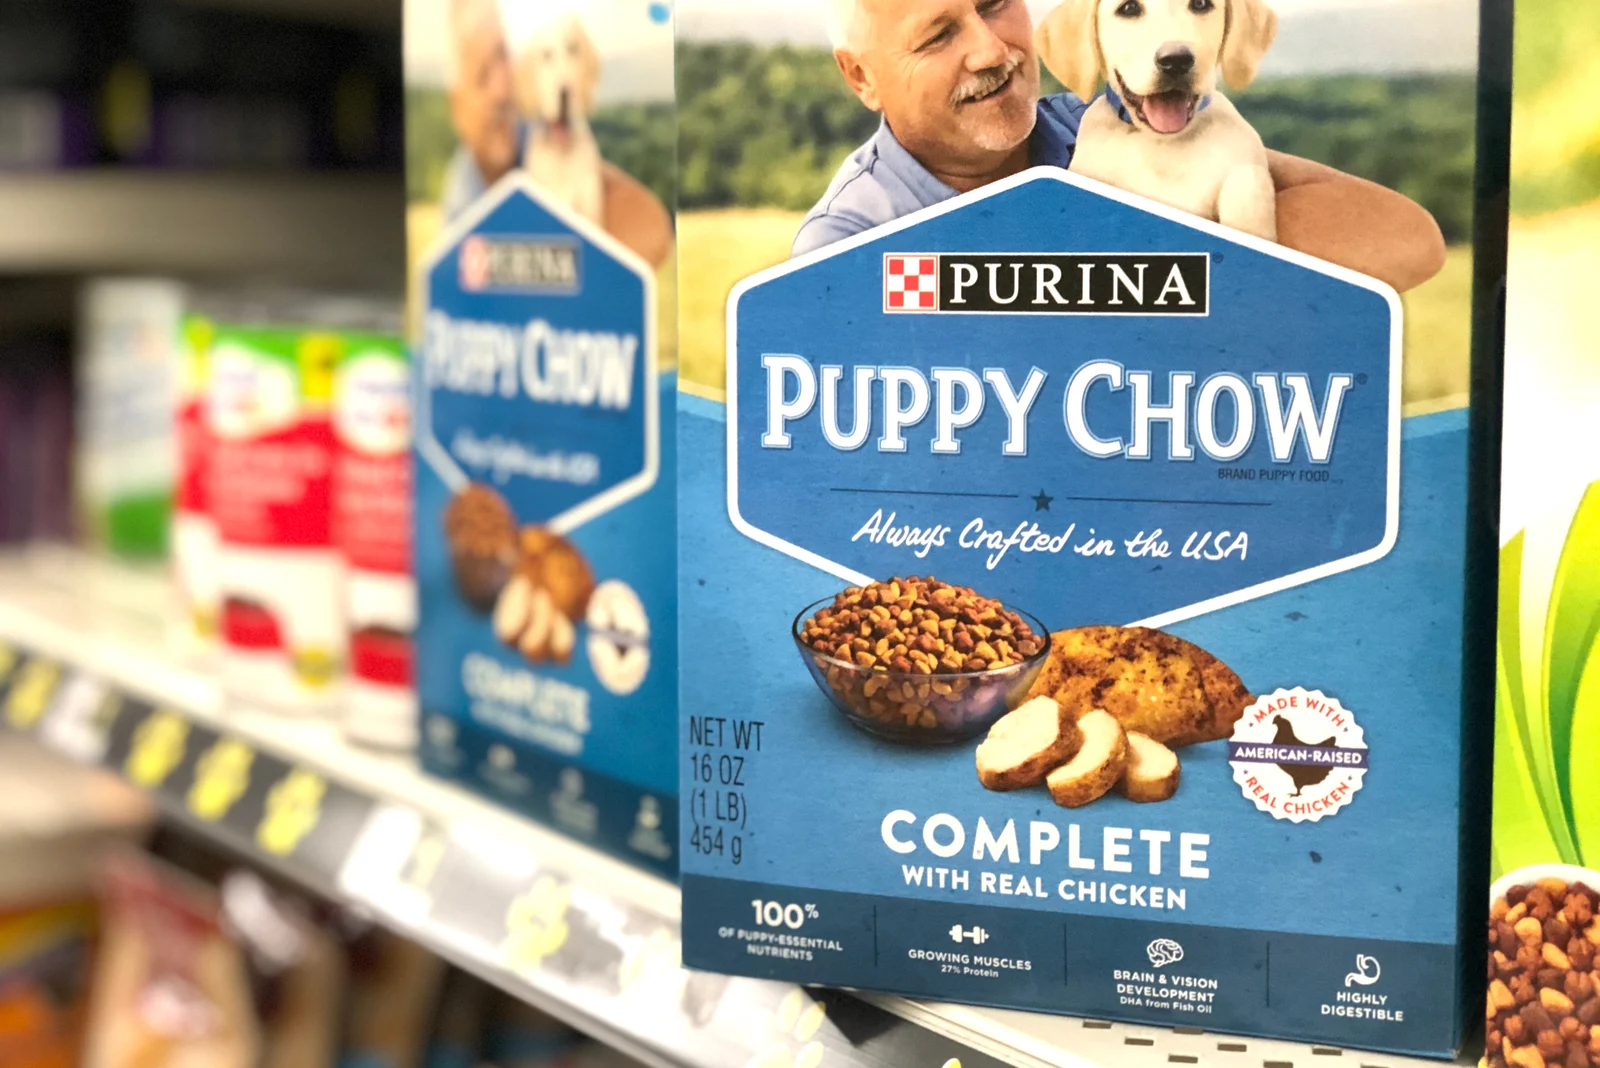 boxes of Purina puppy chow brand dog food